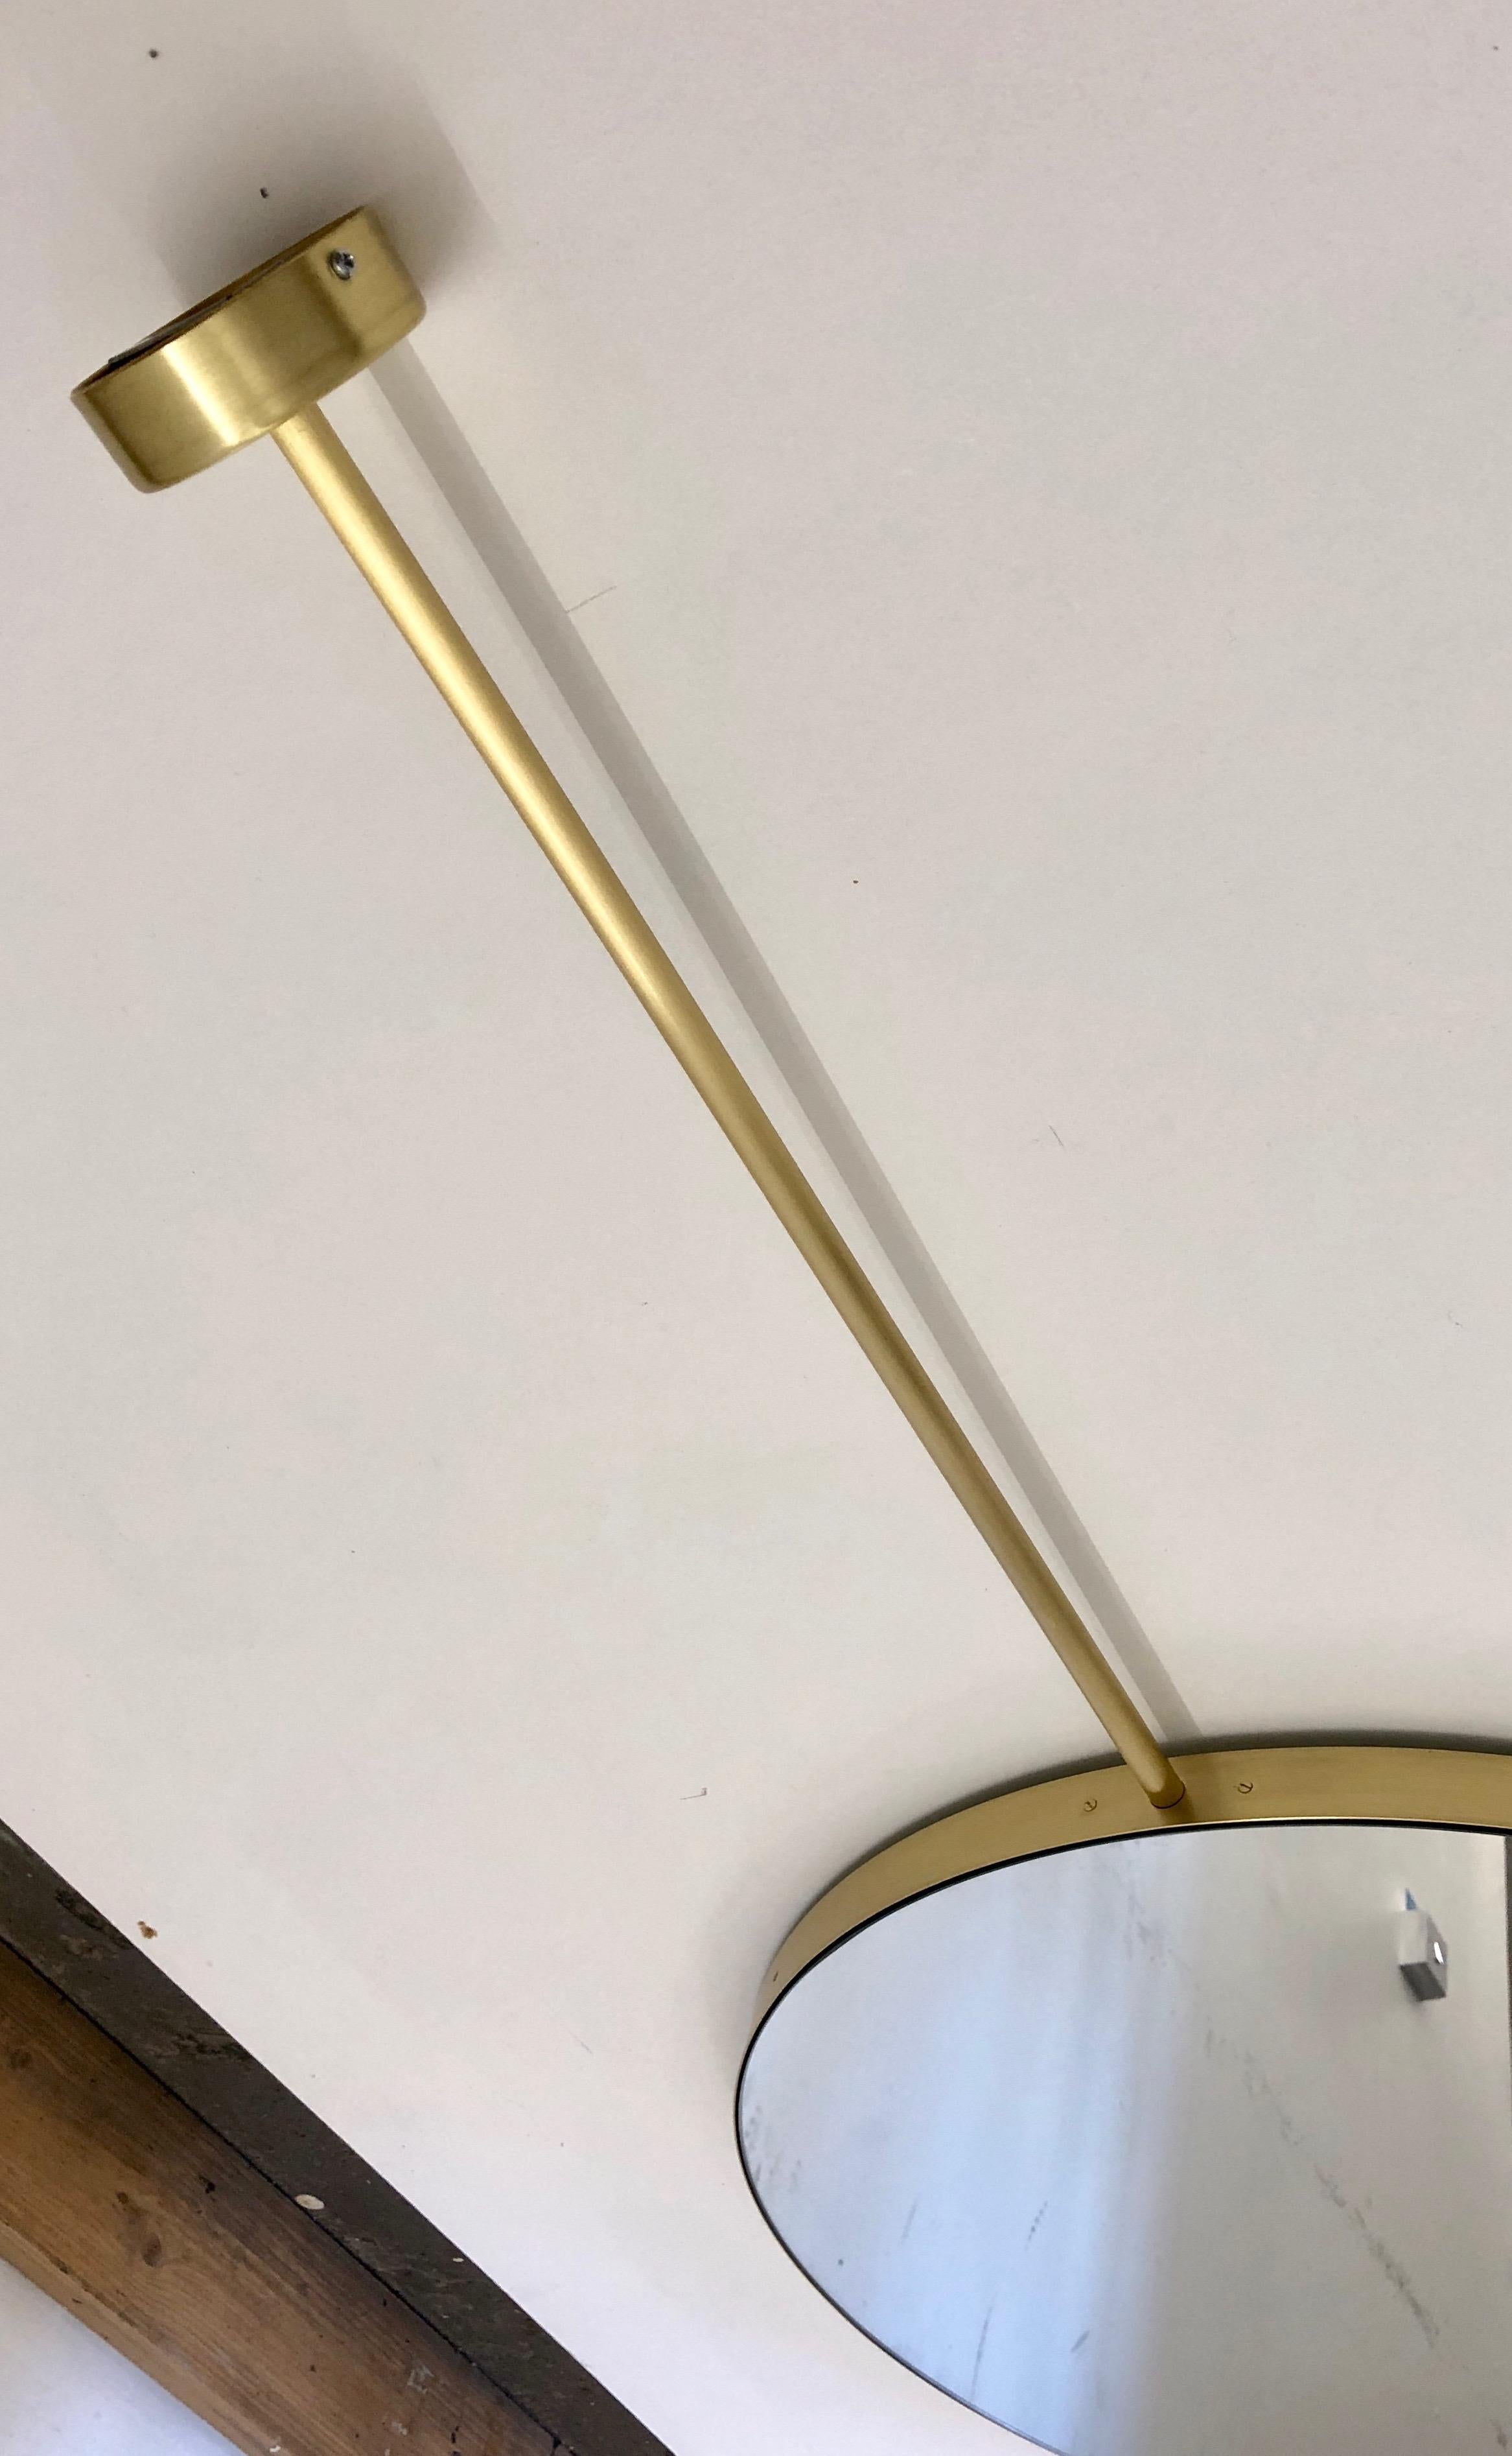 Beautiful suspended Orbis™ round double sided bathroom mirror with a brushed brass frame.

Dimensions: 140 x 55 x 3 cm / 55.2'' x 21.6'' x 1.2''

2 pieces available from stock.

For a bespoke size or finish allow 3 to 4 weeks of production time.